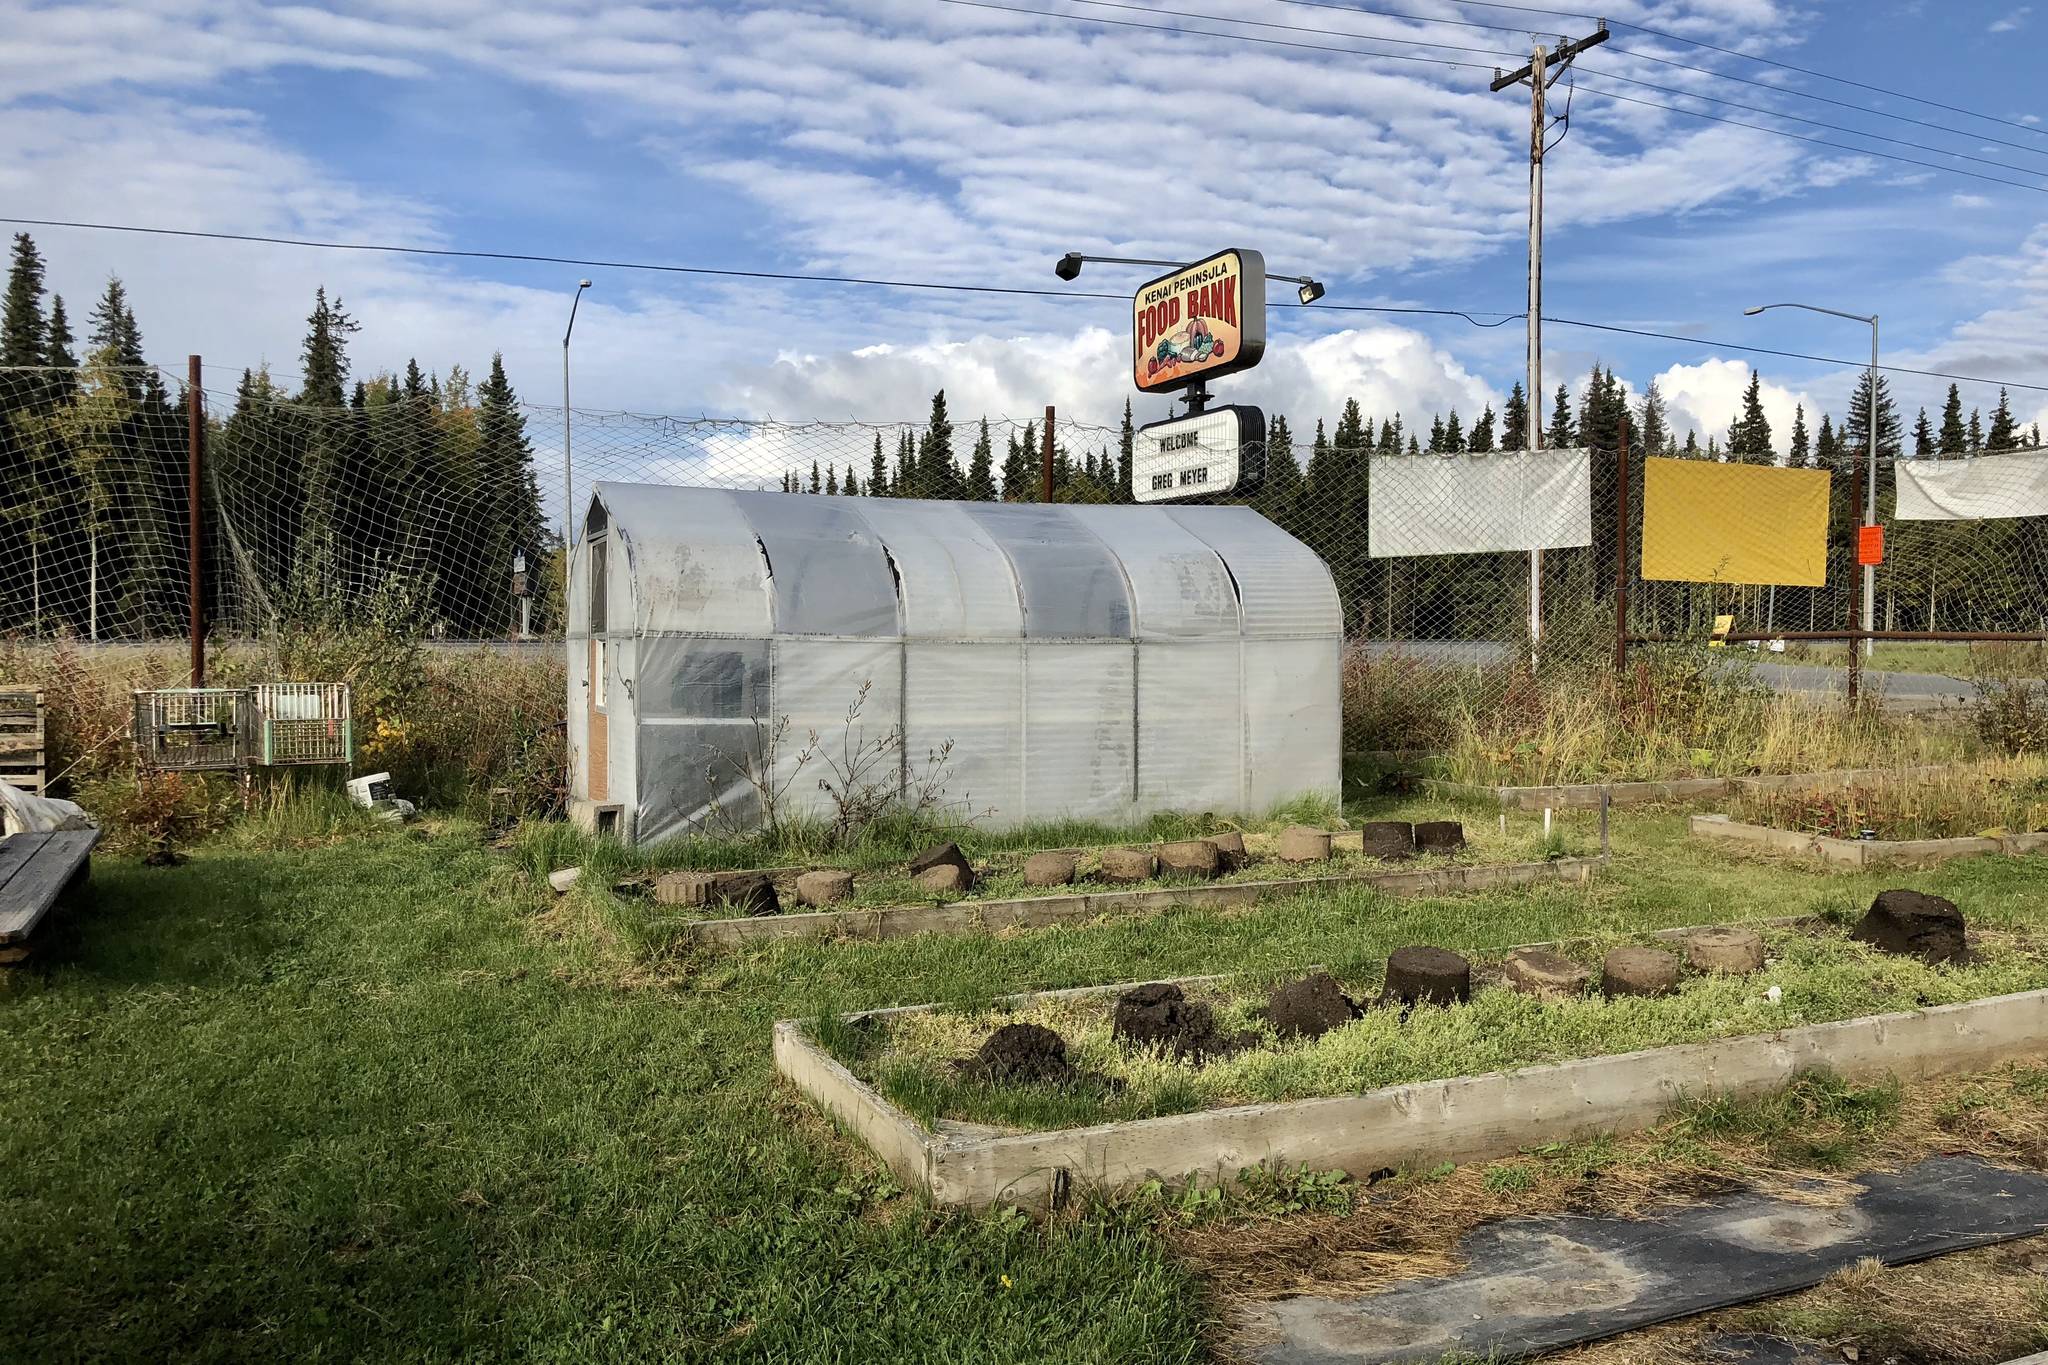 The Kenai Peninsula Food Bank’s greenhouse is photographed on Tuesday near Soldotna. The food bank grows fresh produce and offers it at a weekly farmers market. (Photo by Victoria Petersen/Peninsula Clarion)